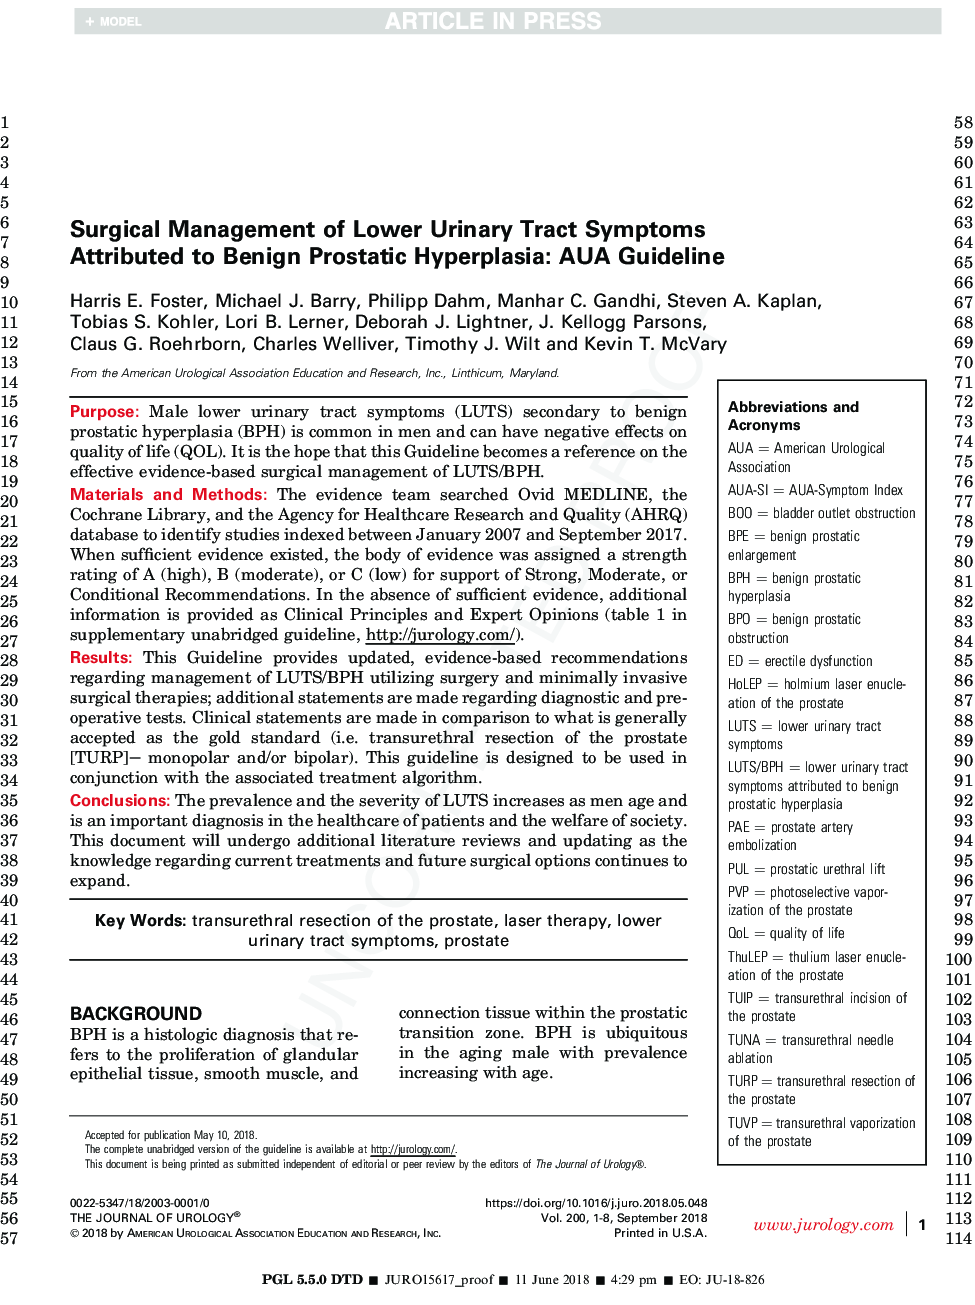 Surgical Management of Lower Urinary Tract Symptoms Attributed to Benign Prostatic Hyperplasia: AUA Guideline